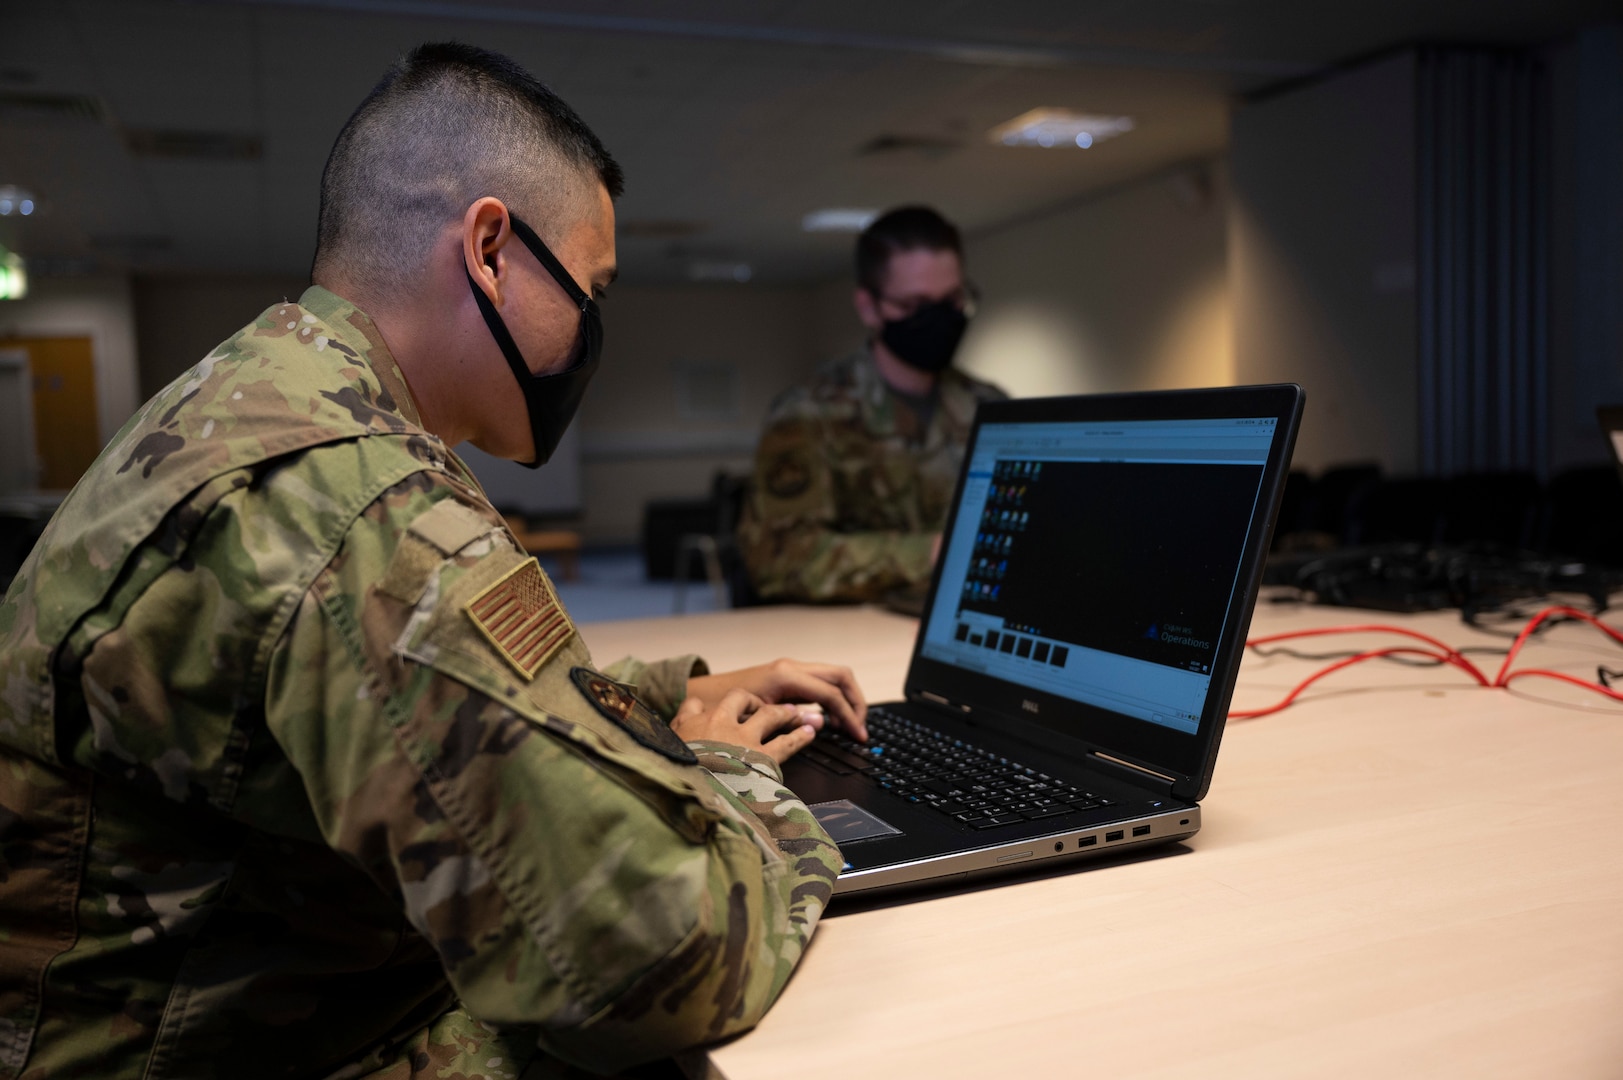 A defensive cyber network operator assigned to the 800th Cyber Protection Team, Joint Force Headquarters Cyber-Air Force, configures a cyber weapons system at RAF Fairford, United Kingdom, Oct. 8, 2021. Throughout the duration of their deployment, 800th CPT  will hunt, harden and protect networks to increase resiliency of strategic assets. They configured a weapons system to collect logs and traffic across B-1B Lancer aircraft systems in support of the 9th Expeditionary Bomb Squadron during a Bomber Task Force Europe deployment. (U.S. Air Force photo by Senior Airman Colin Hollowell)